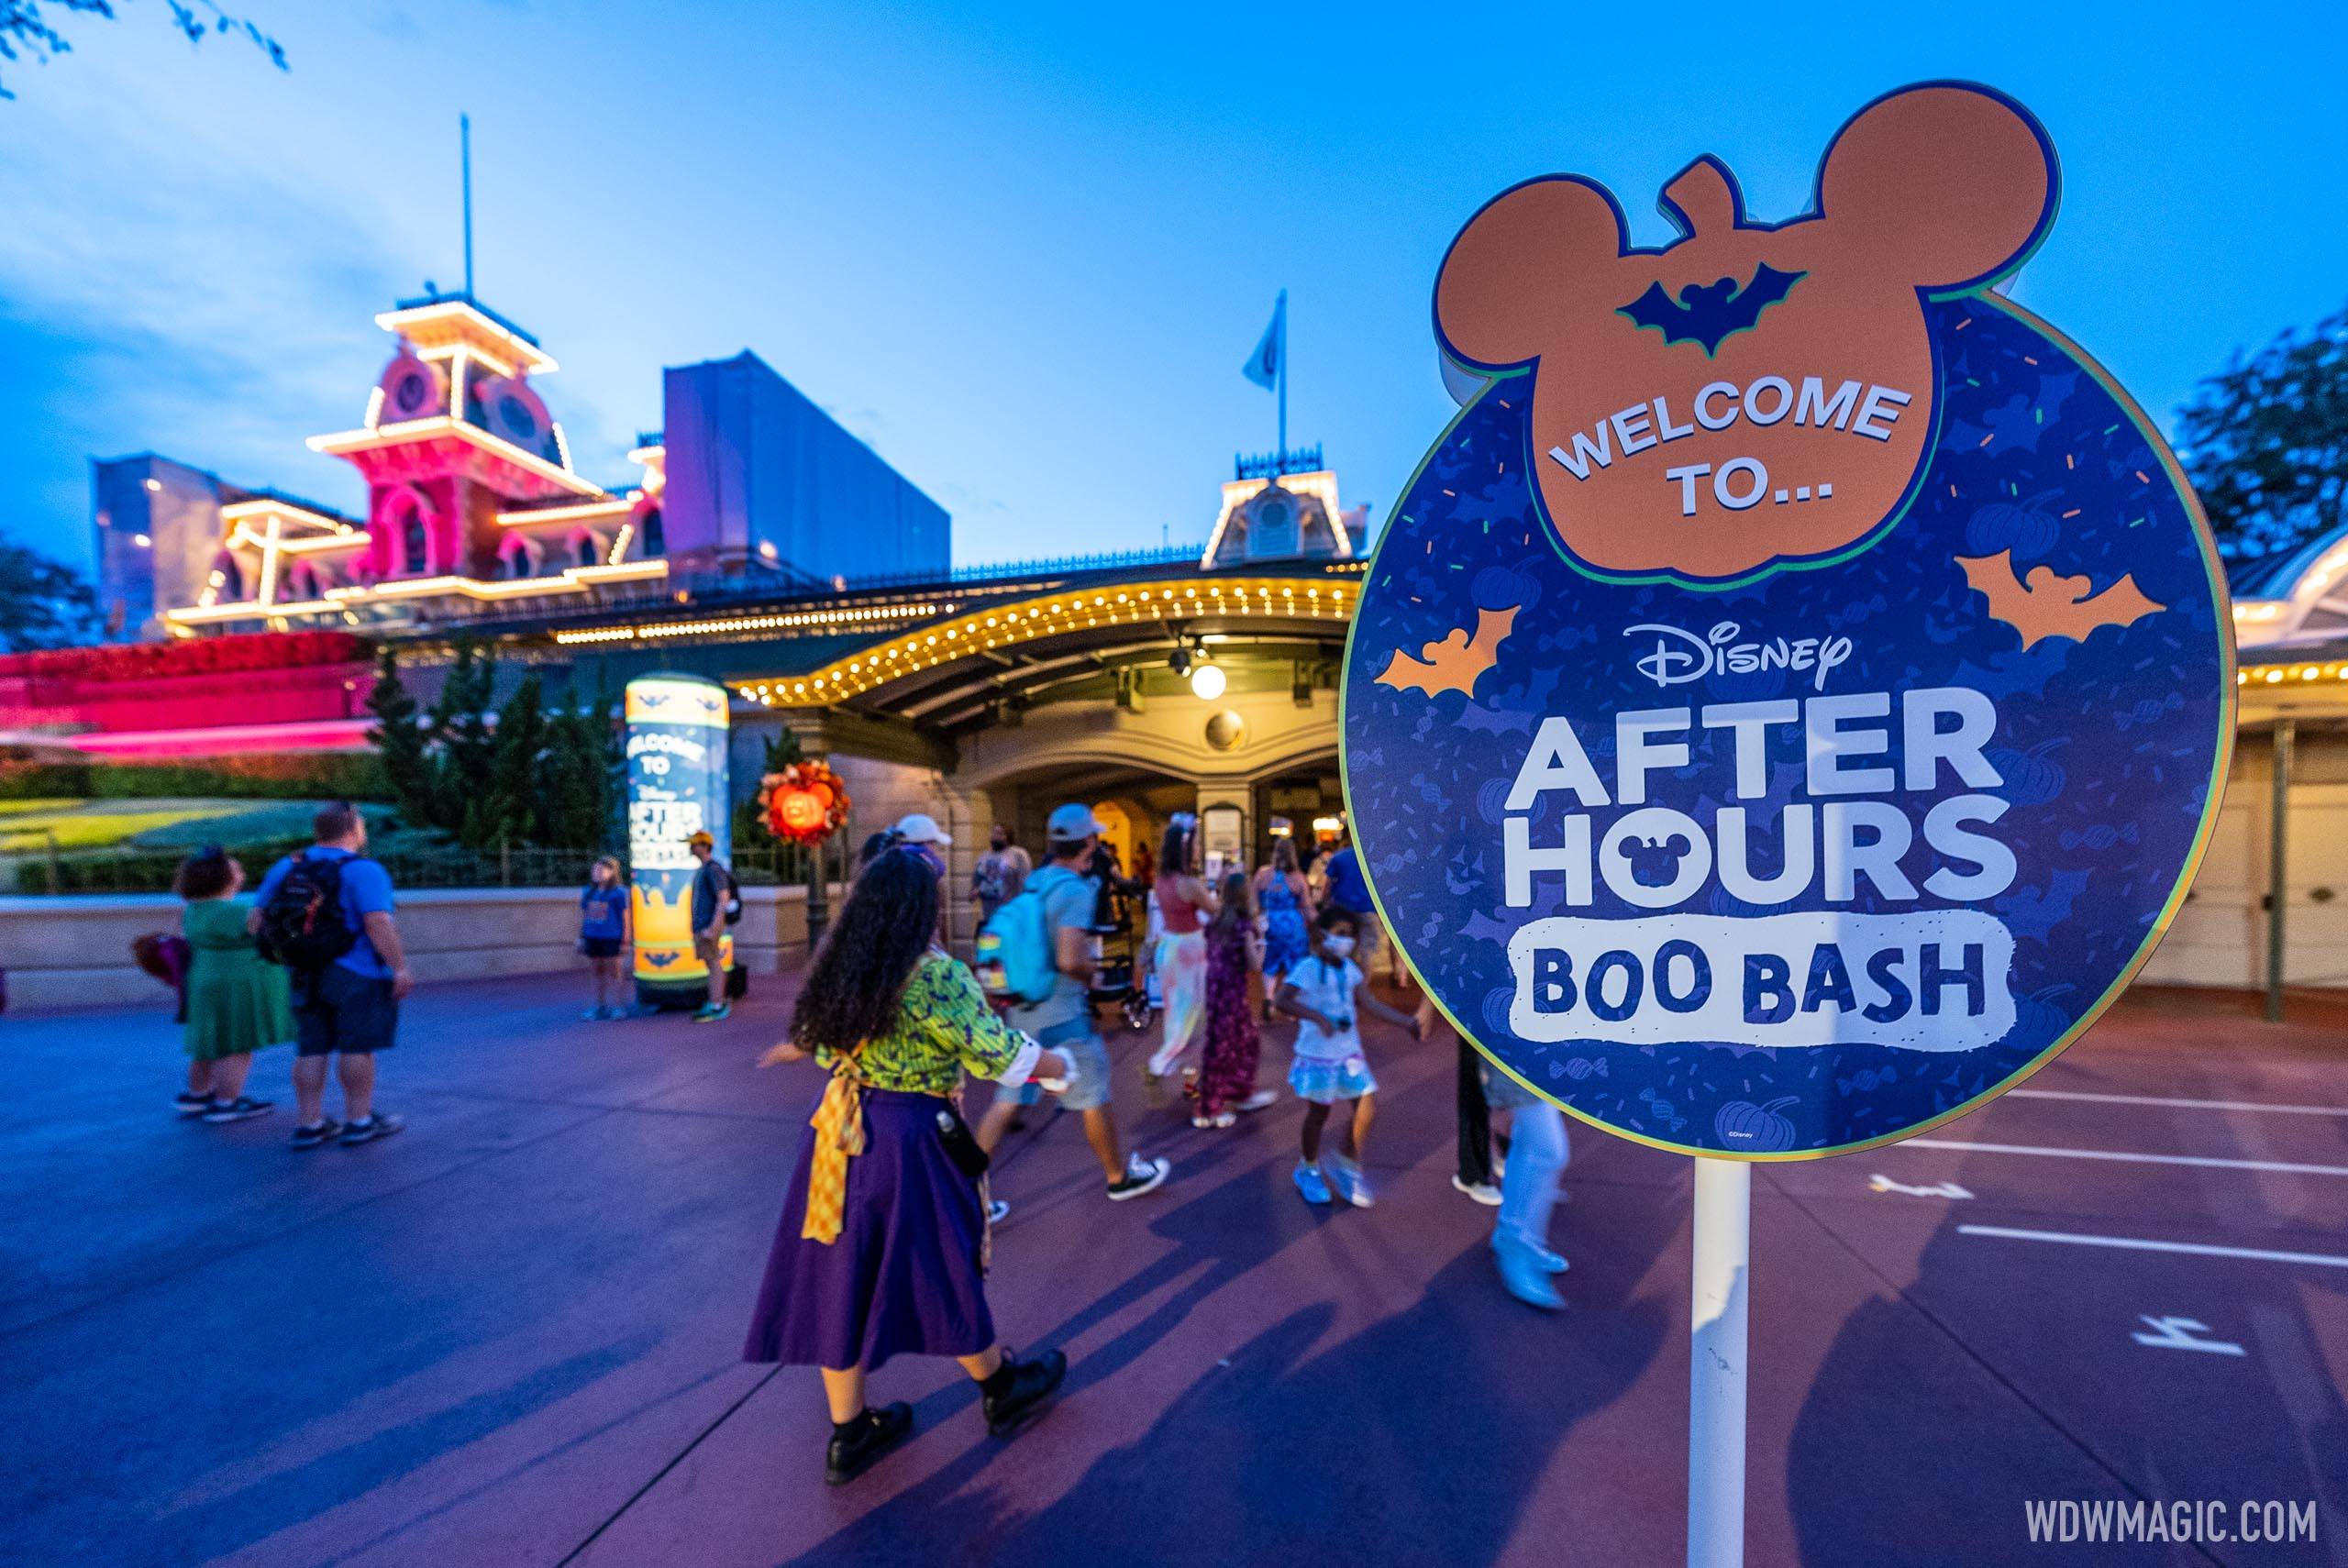 Disney After Hours BOO BASH opening night